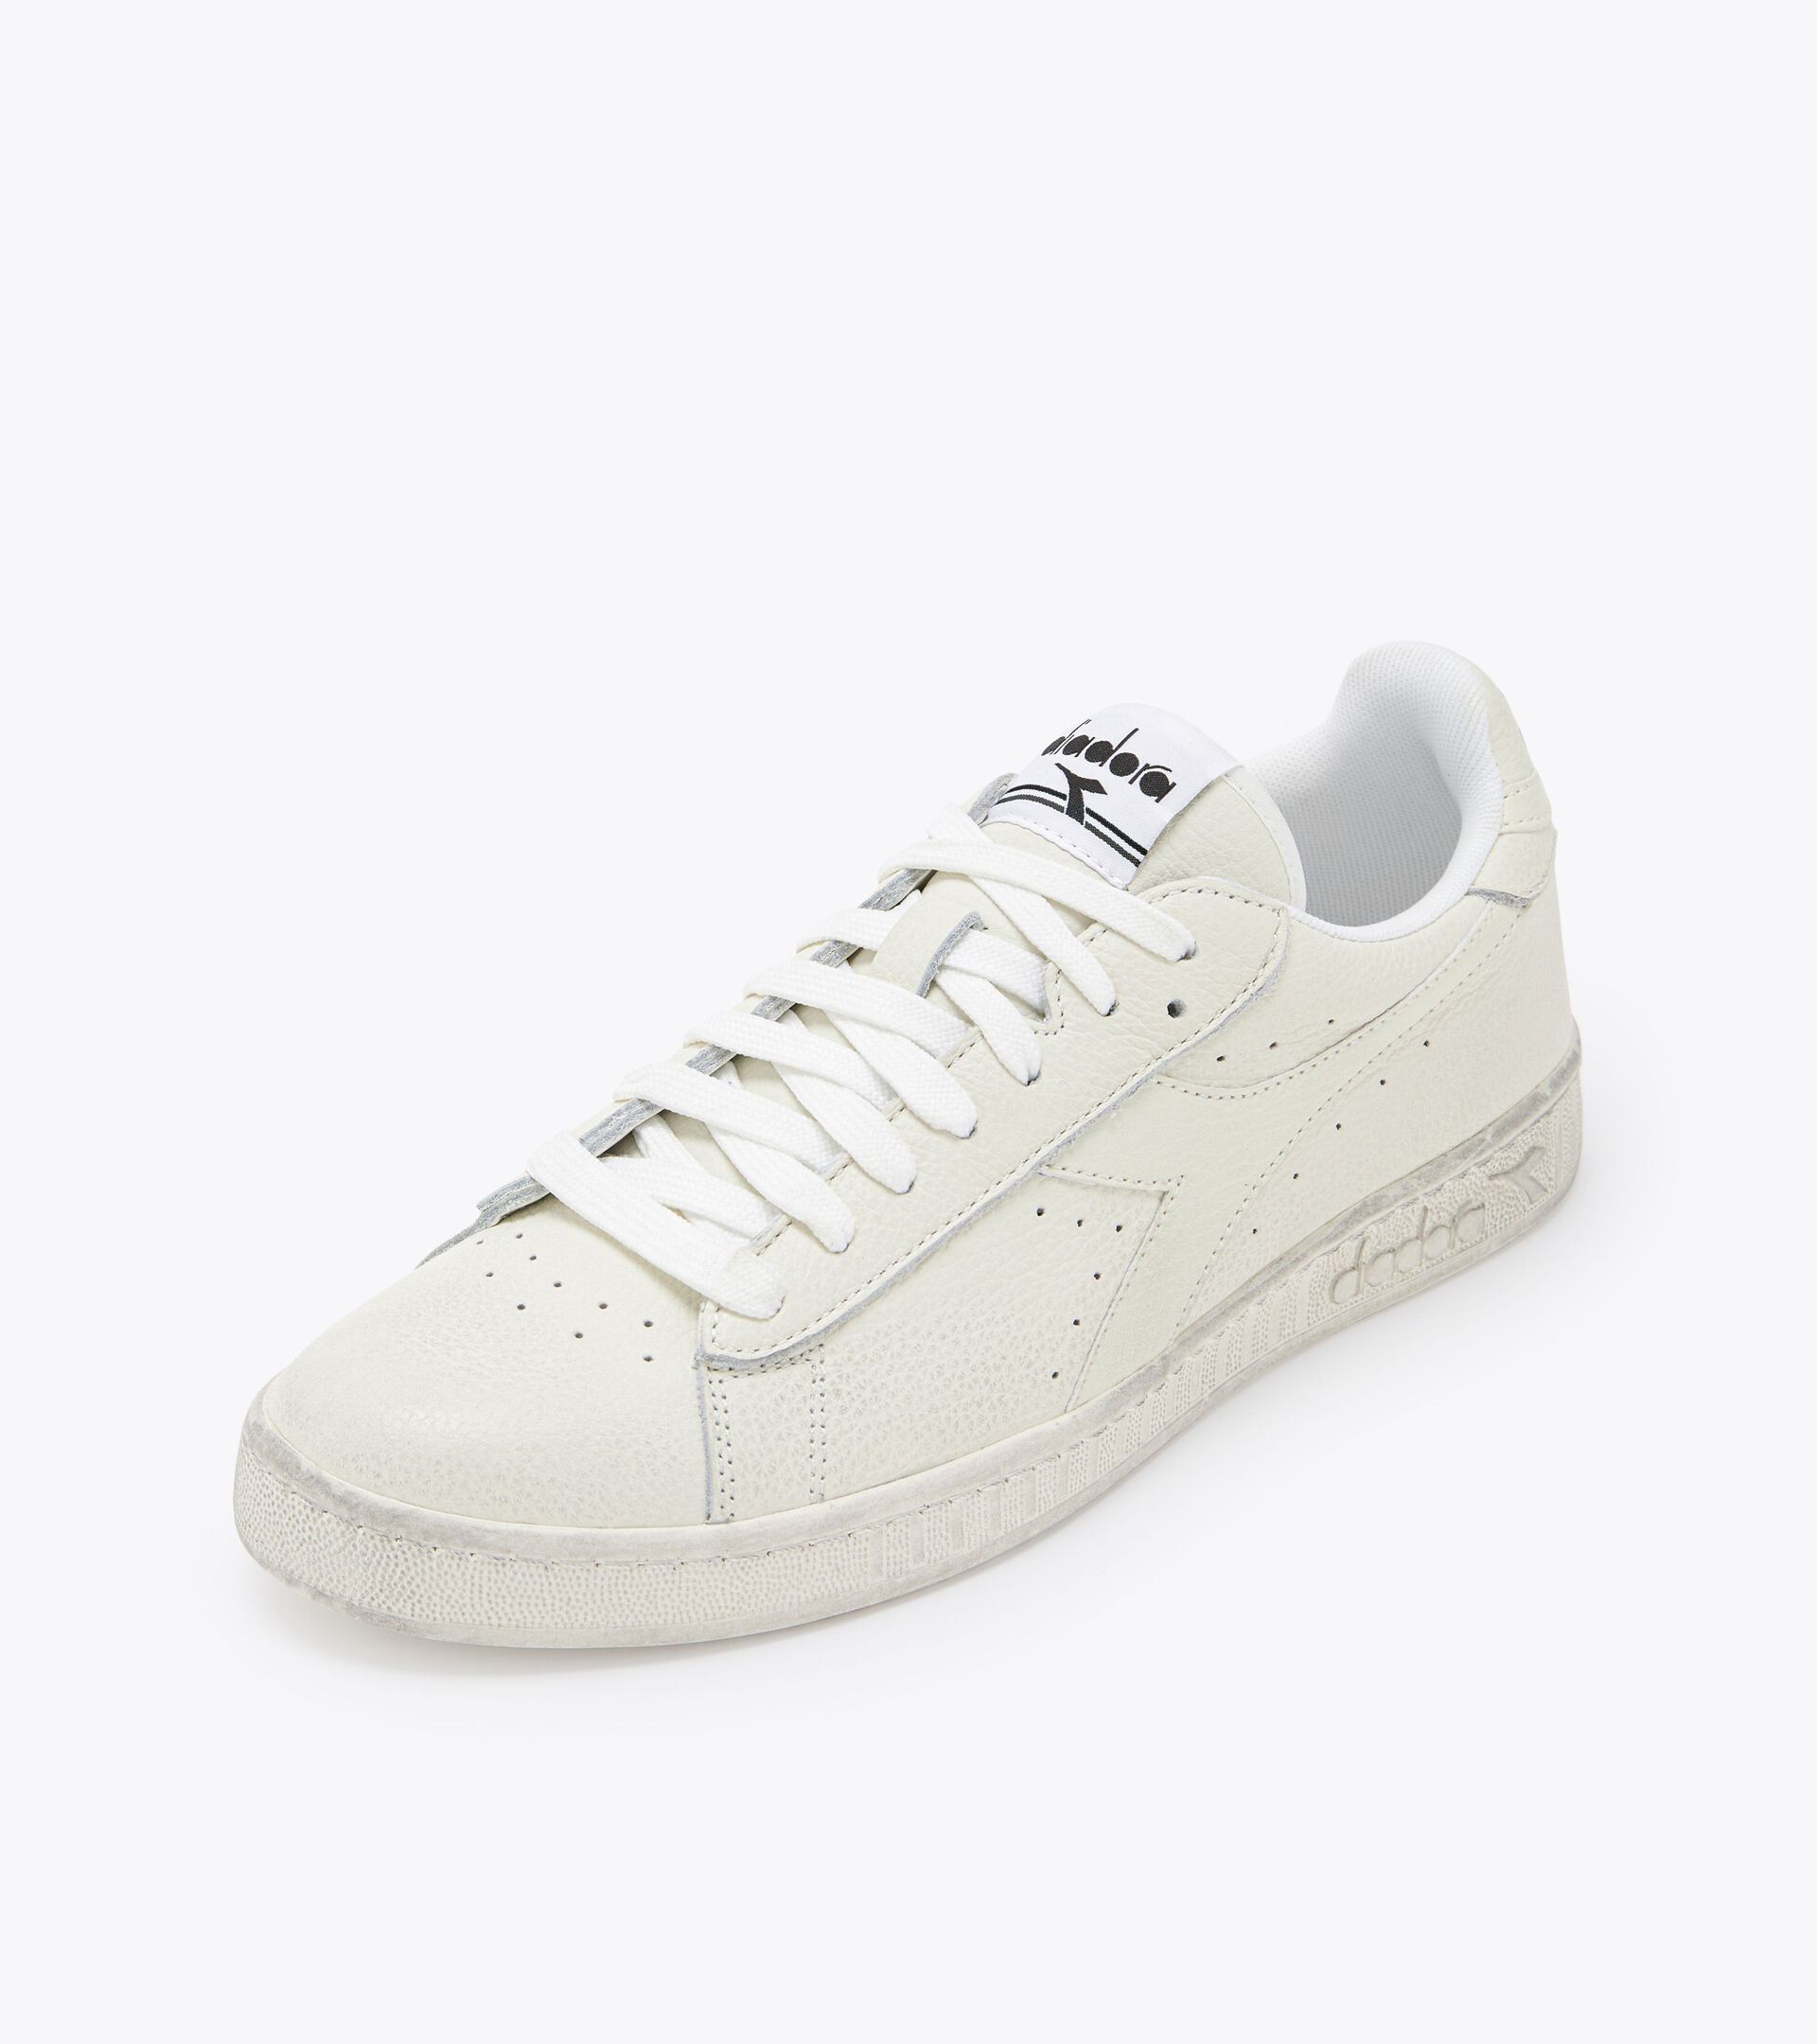 GAME L LOW WAXED Sporty sneakers - Gender neutral - Diadora Online Store US